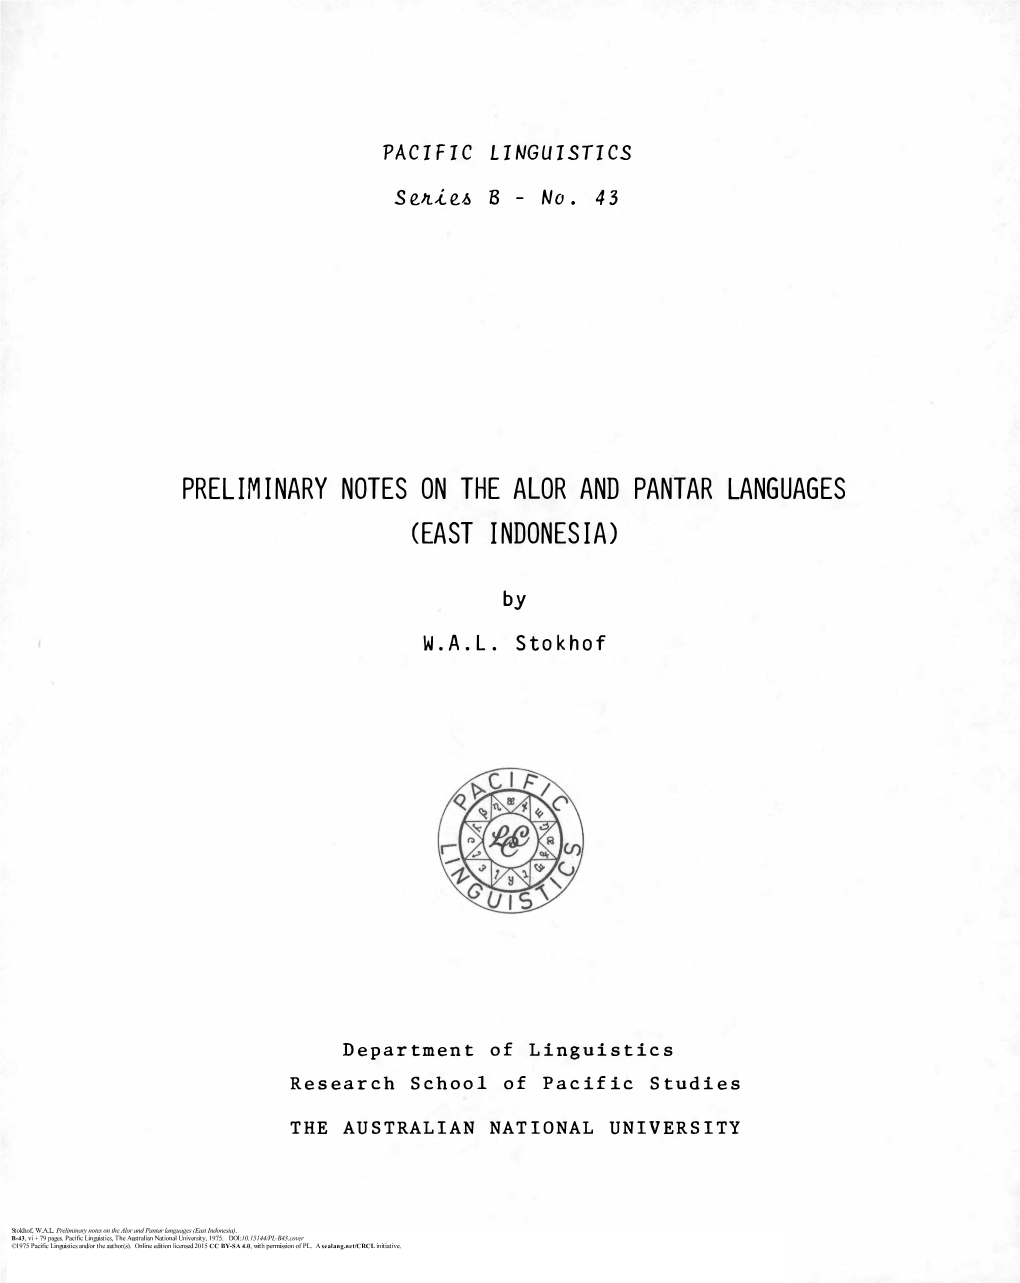 Preliminary Notes on the Alor and Pantar Languages (East Indonesia)